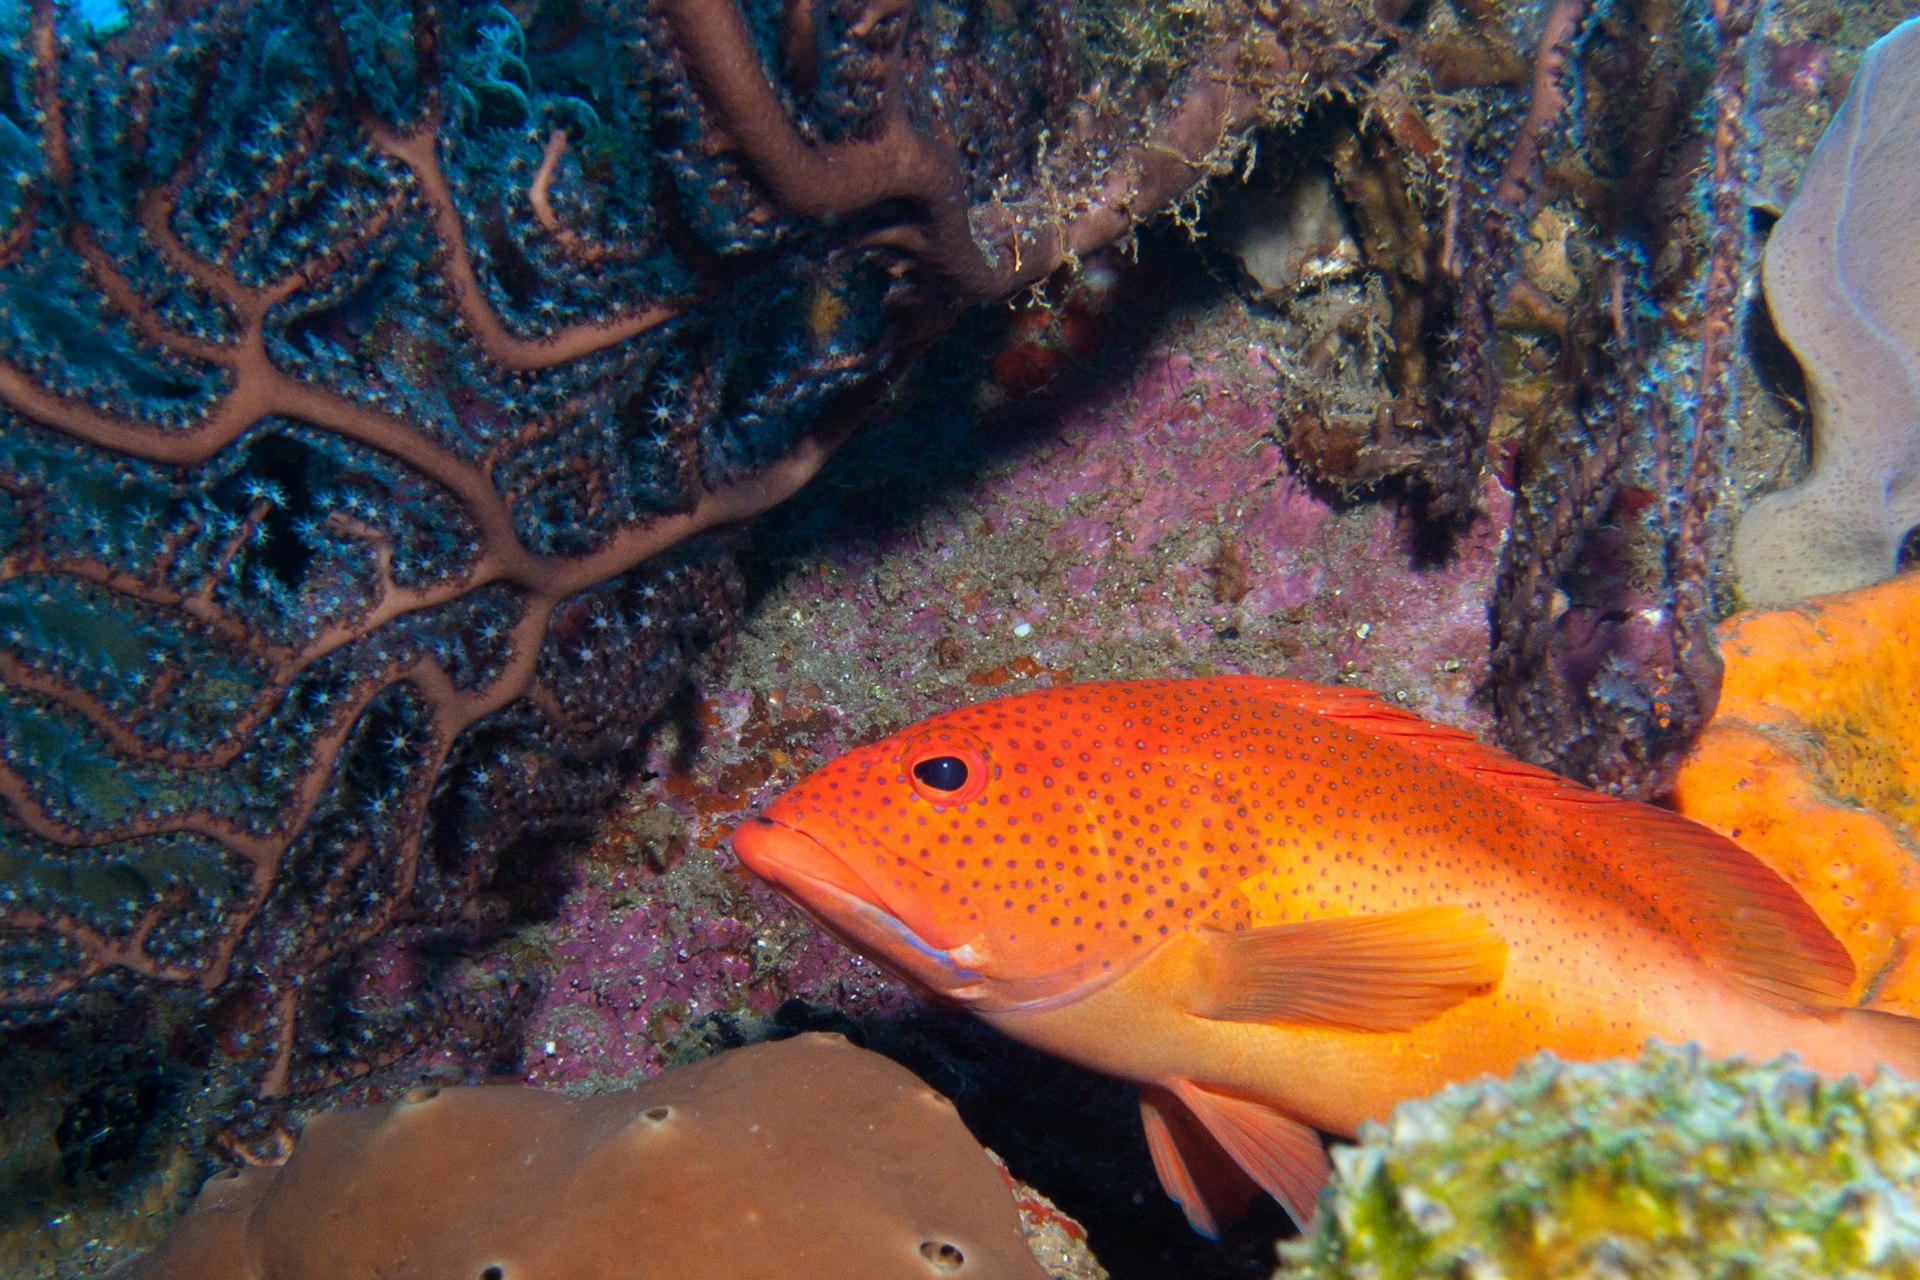 A cony fish in the waters off Saba, Eastern Caribbean